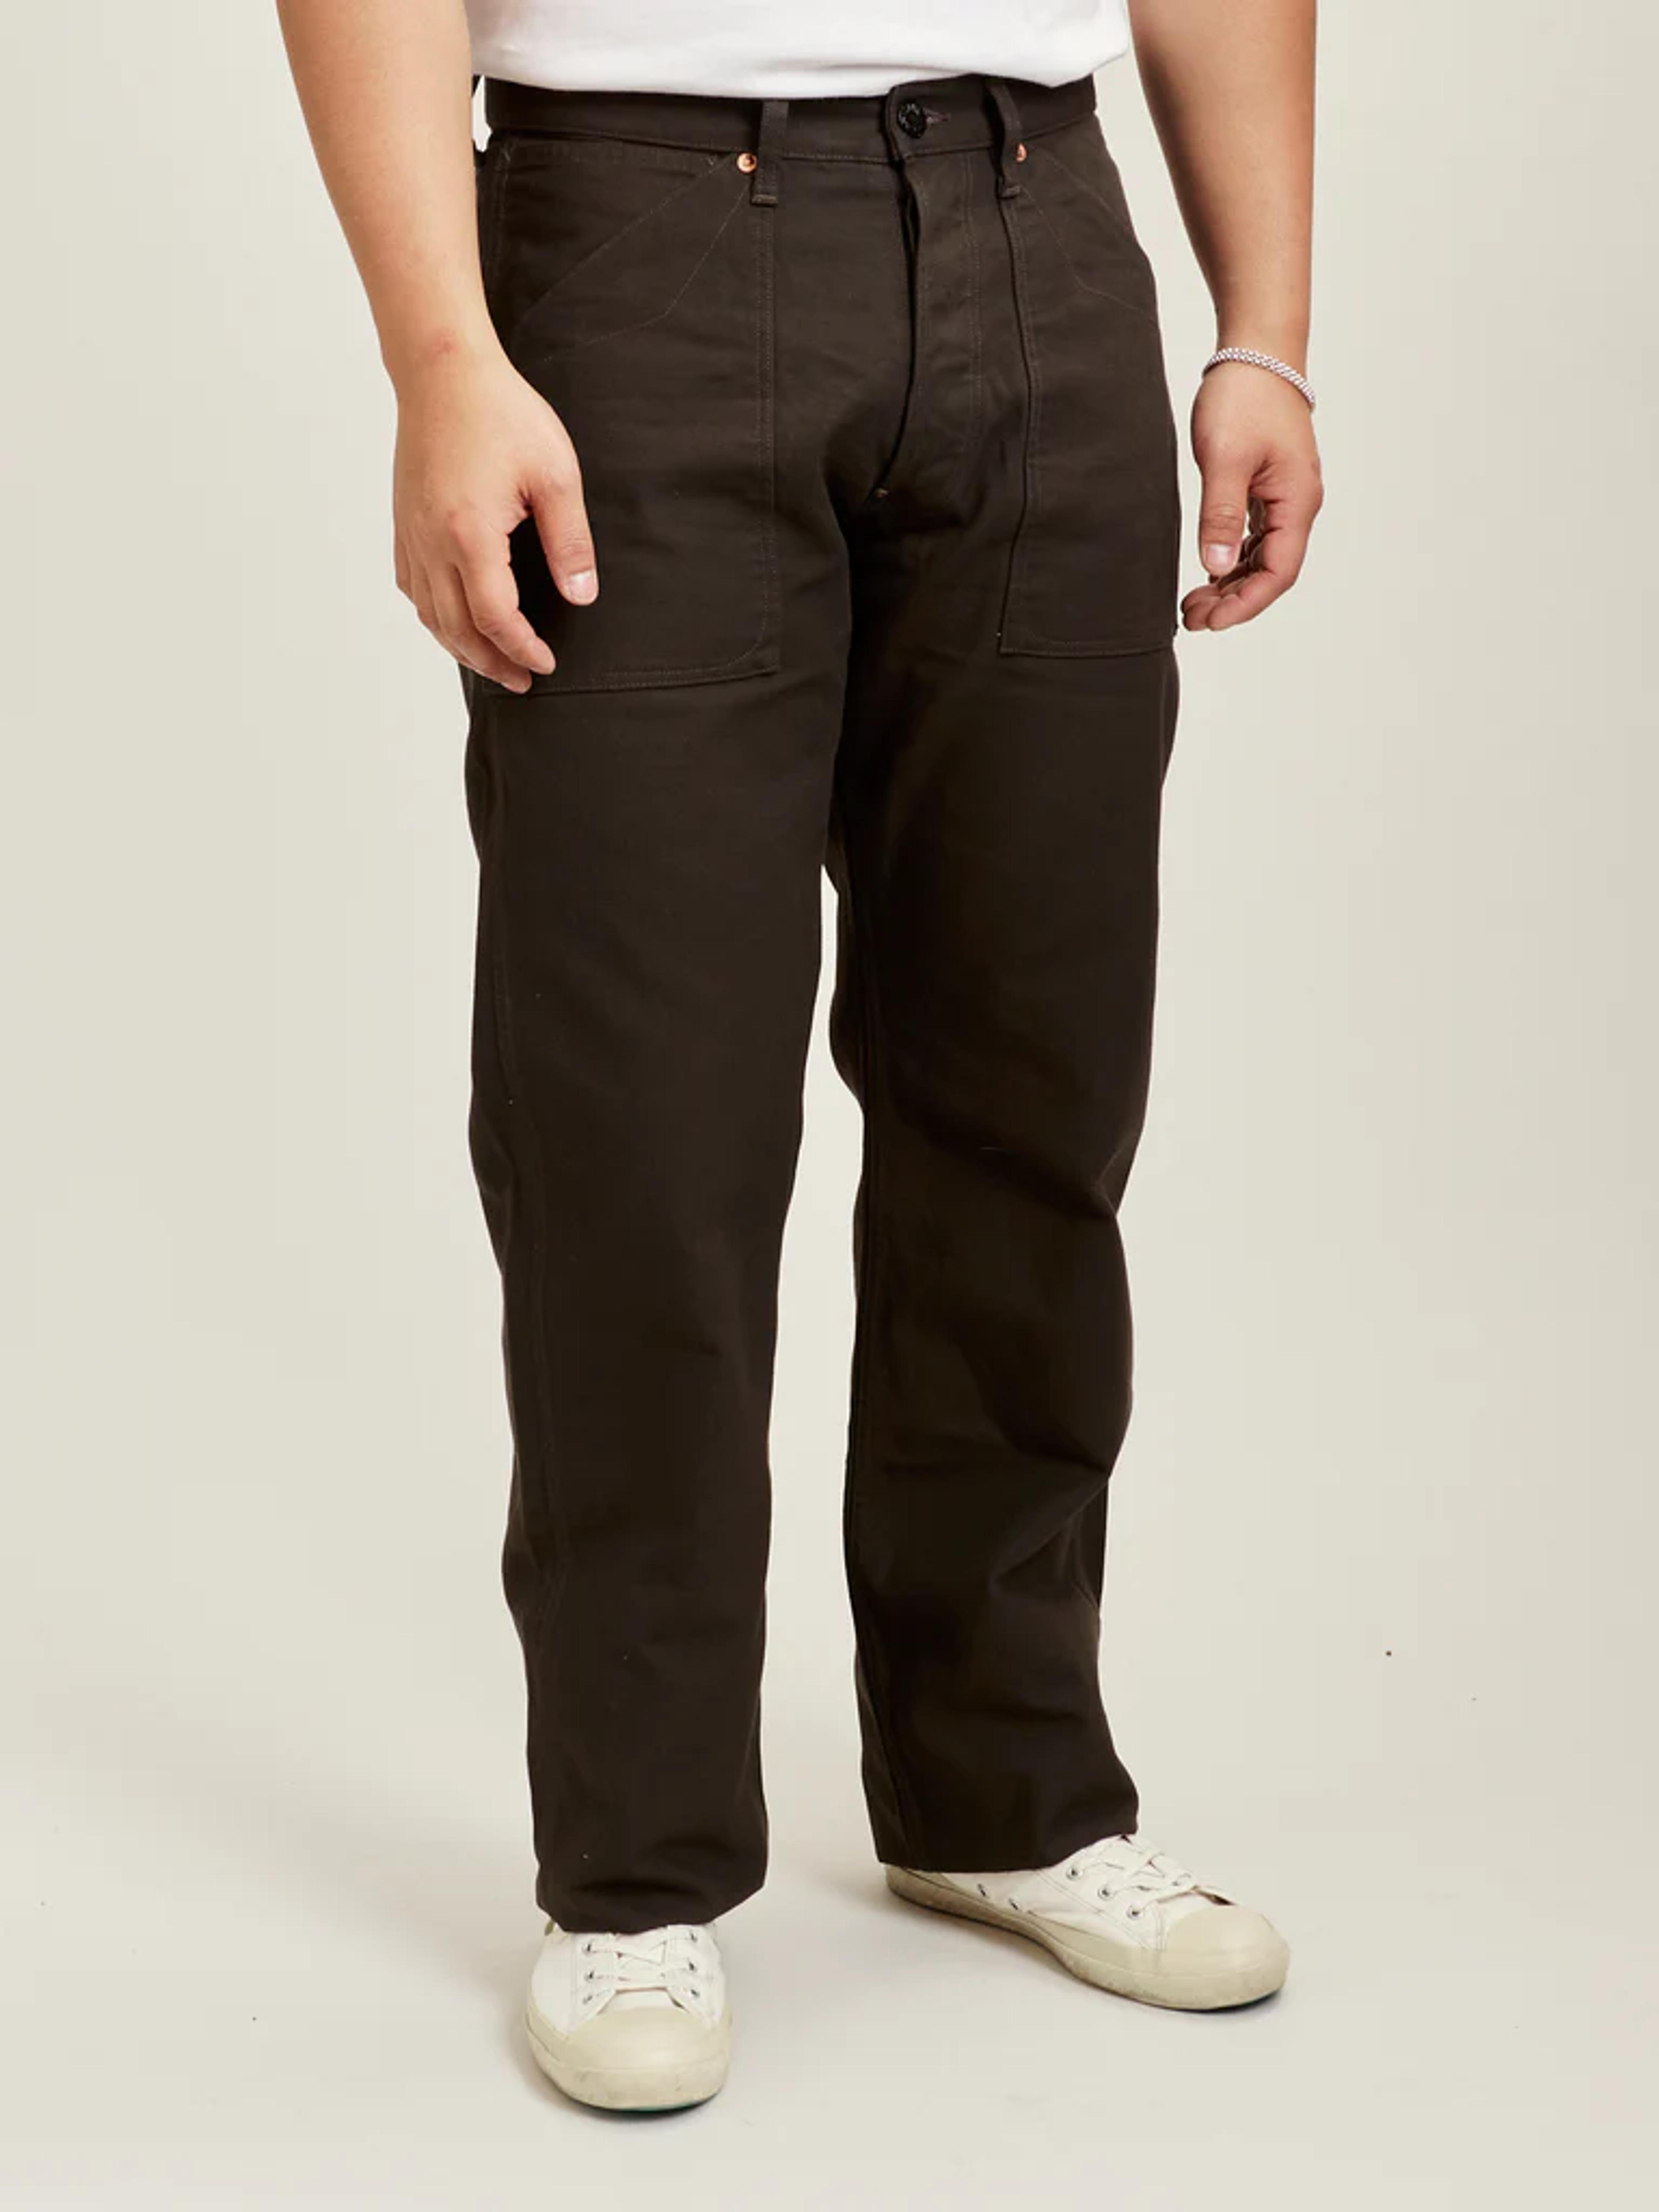 Duck Canvas Work Pants in Charcoal Grey – Blue Owl Workshop